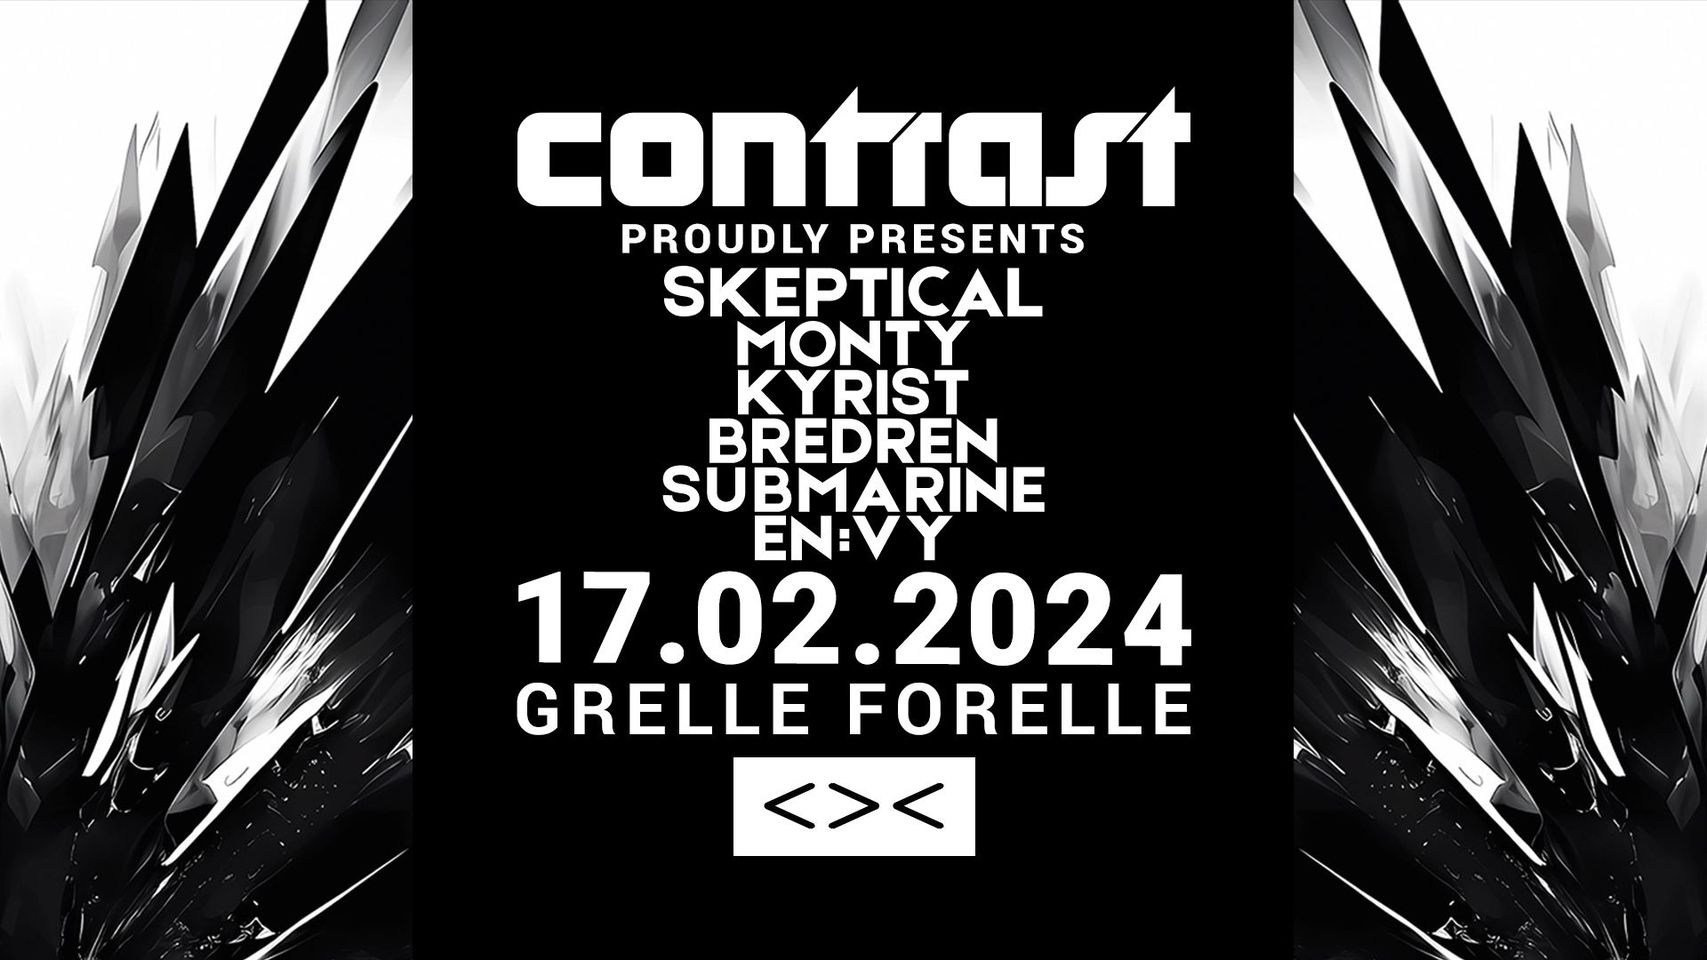 CONTRAST am 17. February 2024 @ Grelle Forelle.